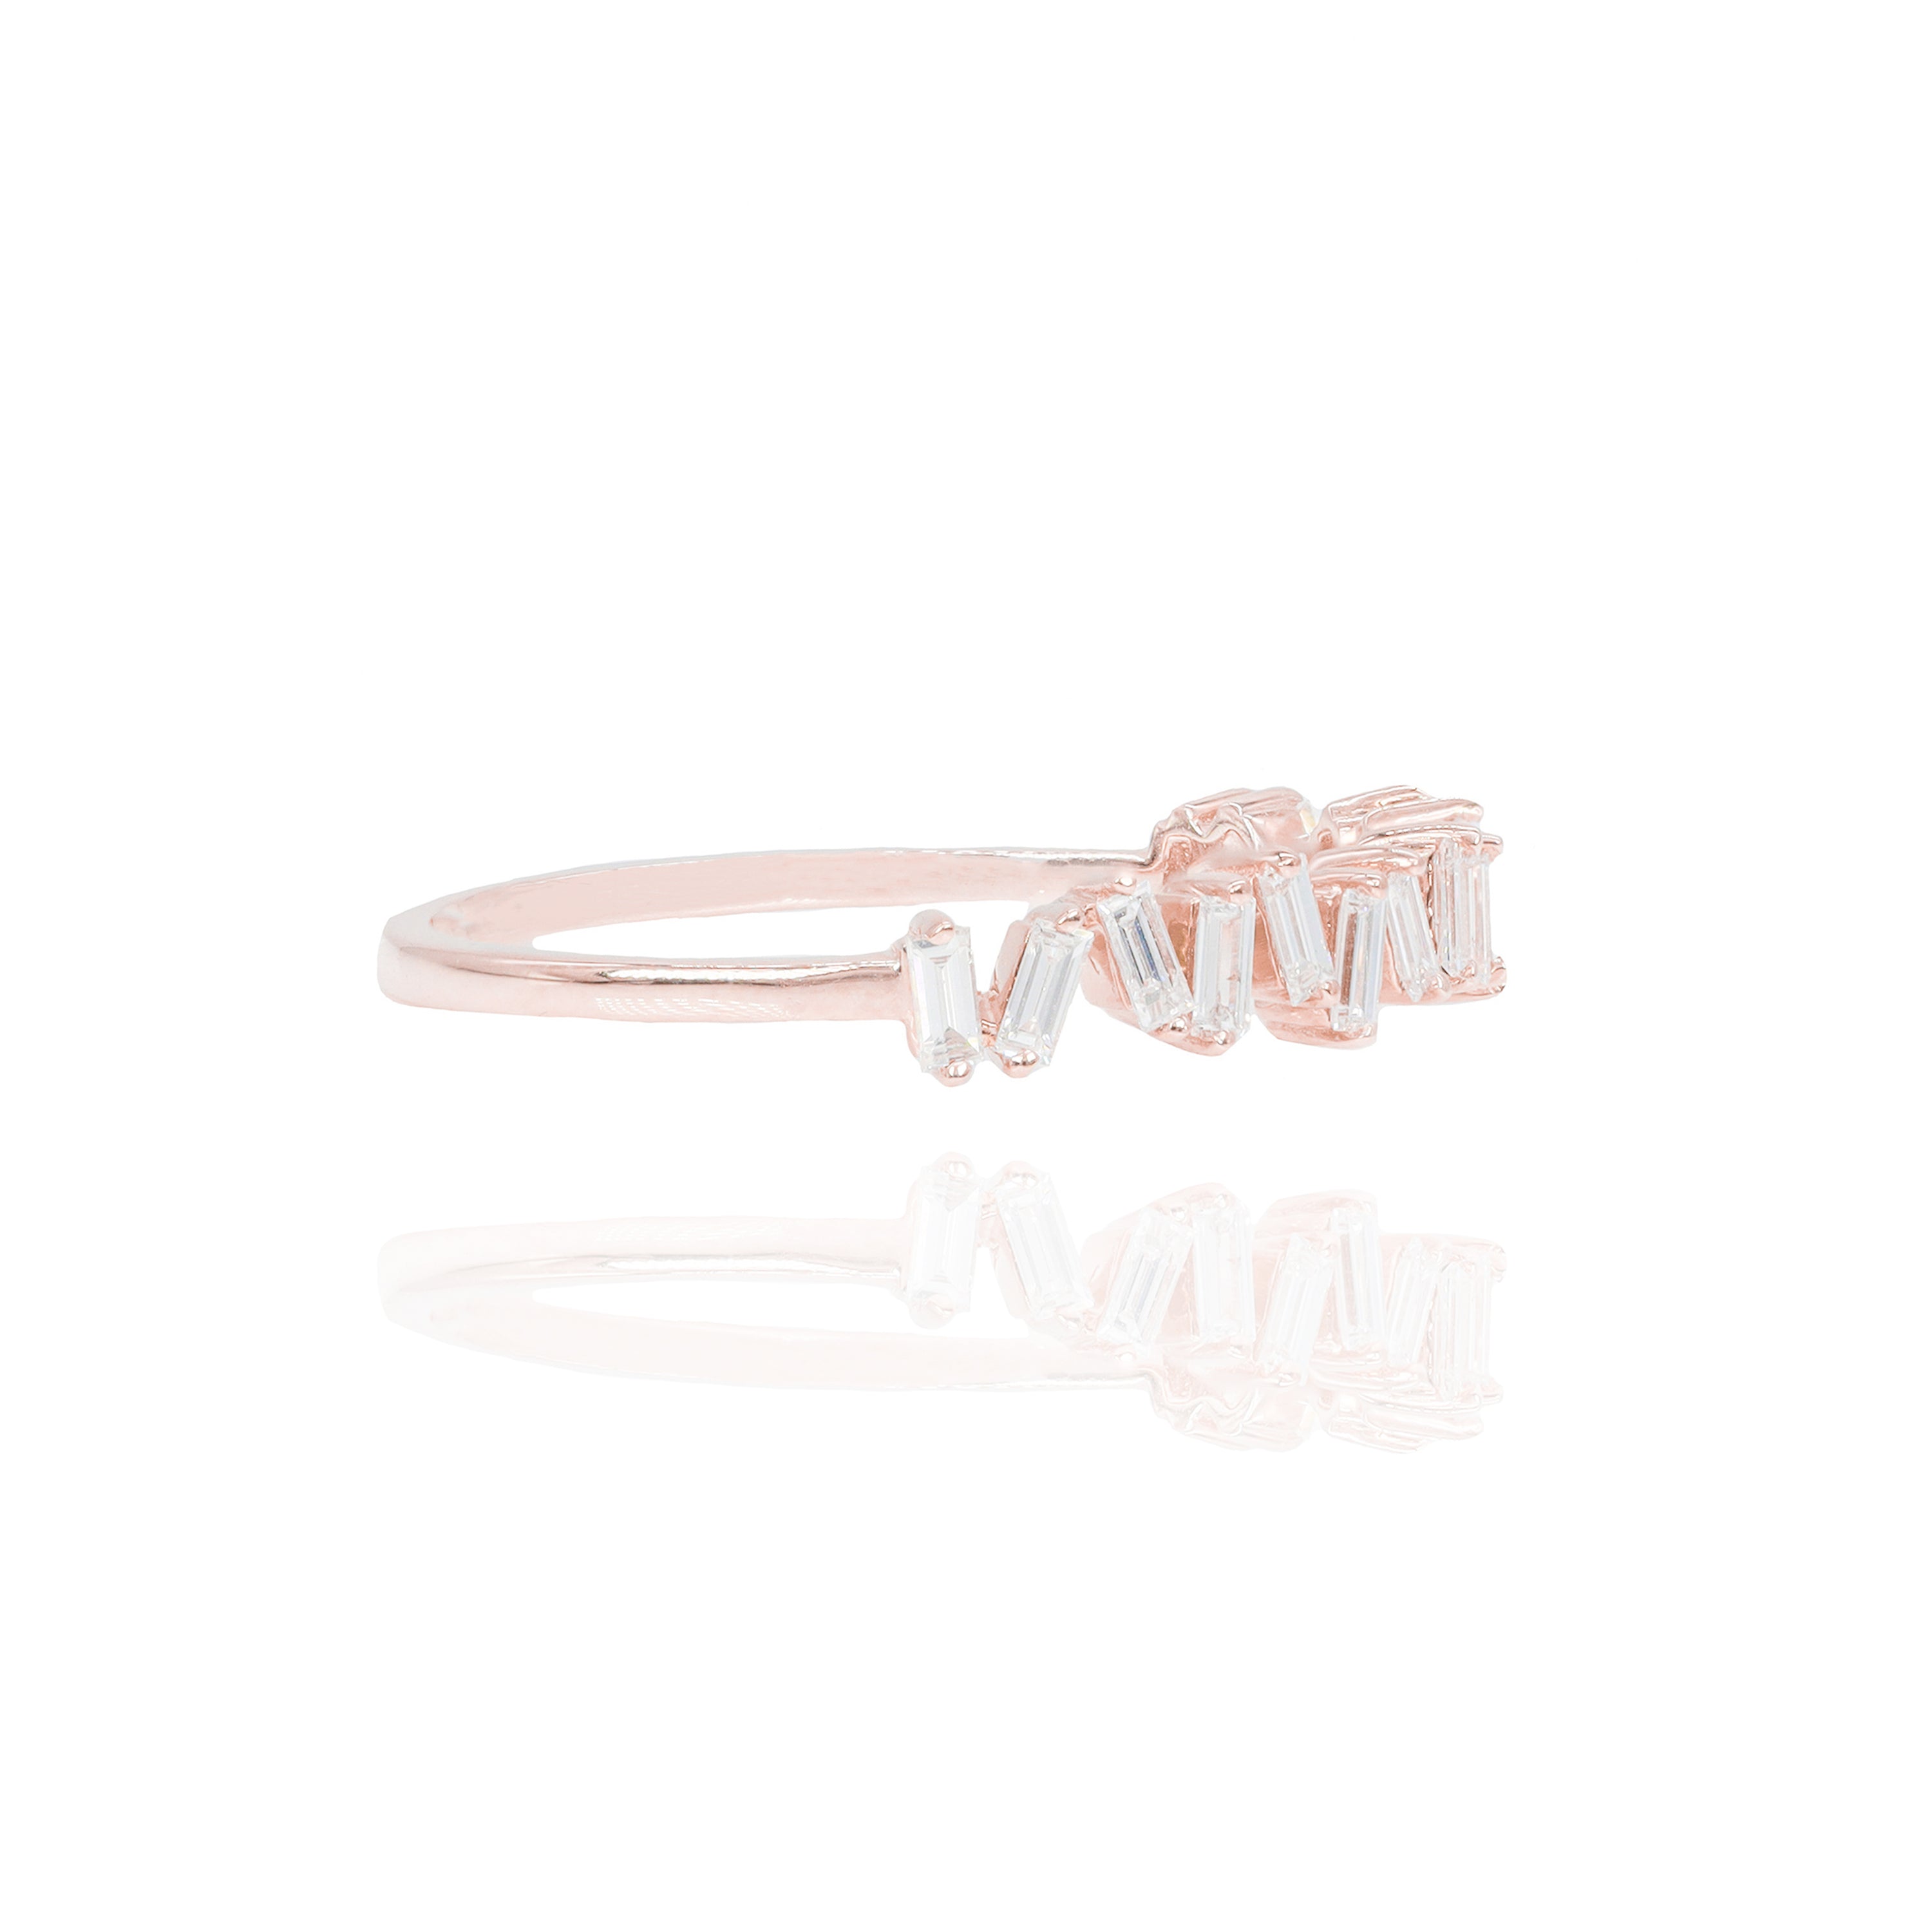 Jagged Baguette Diamond Ring Band